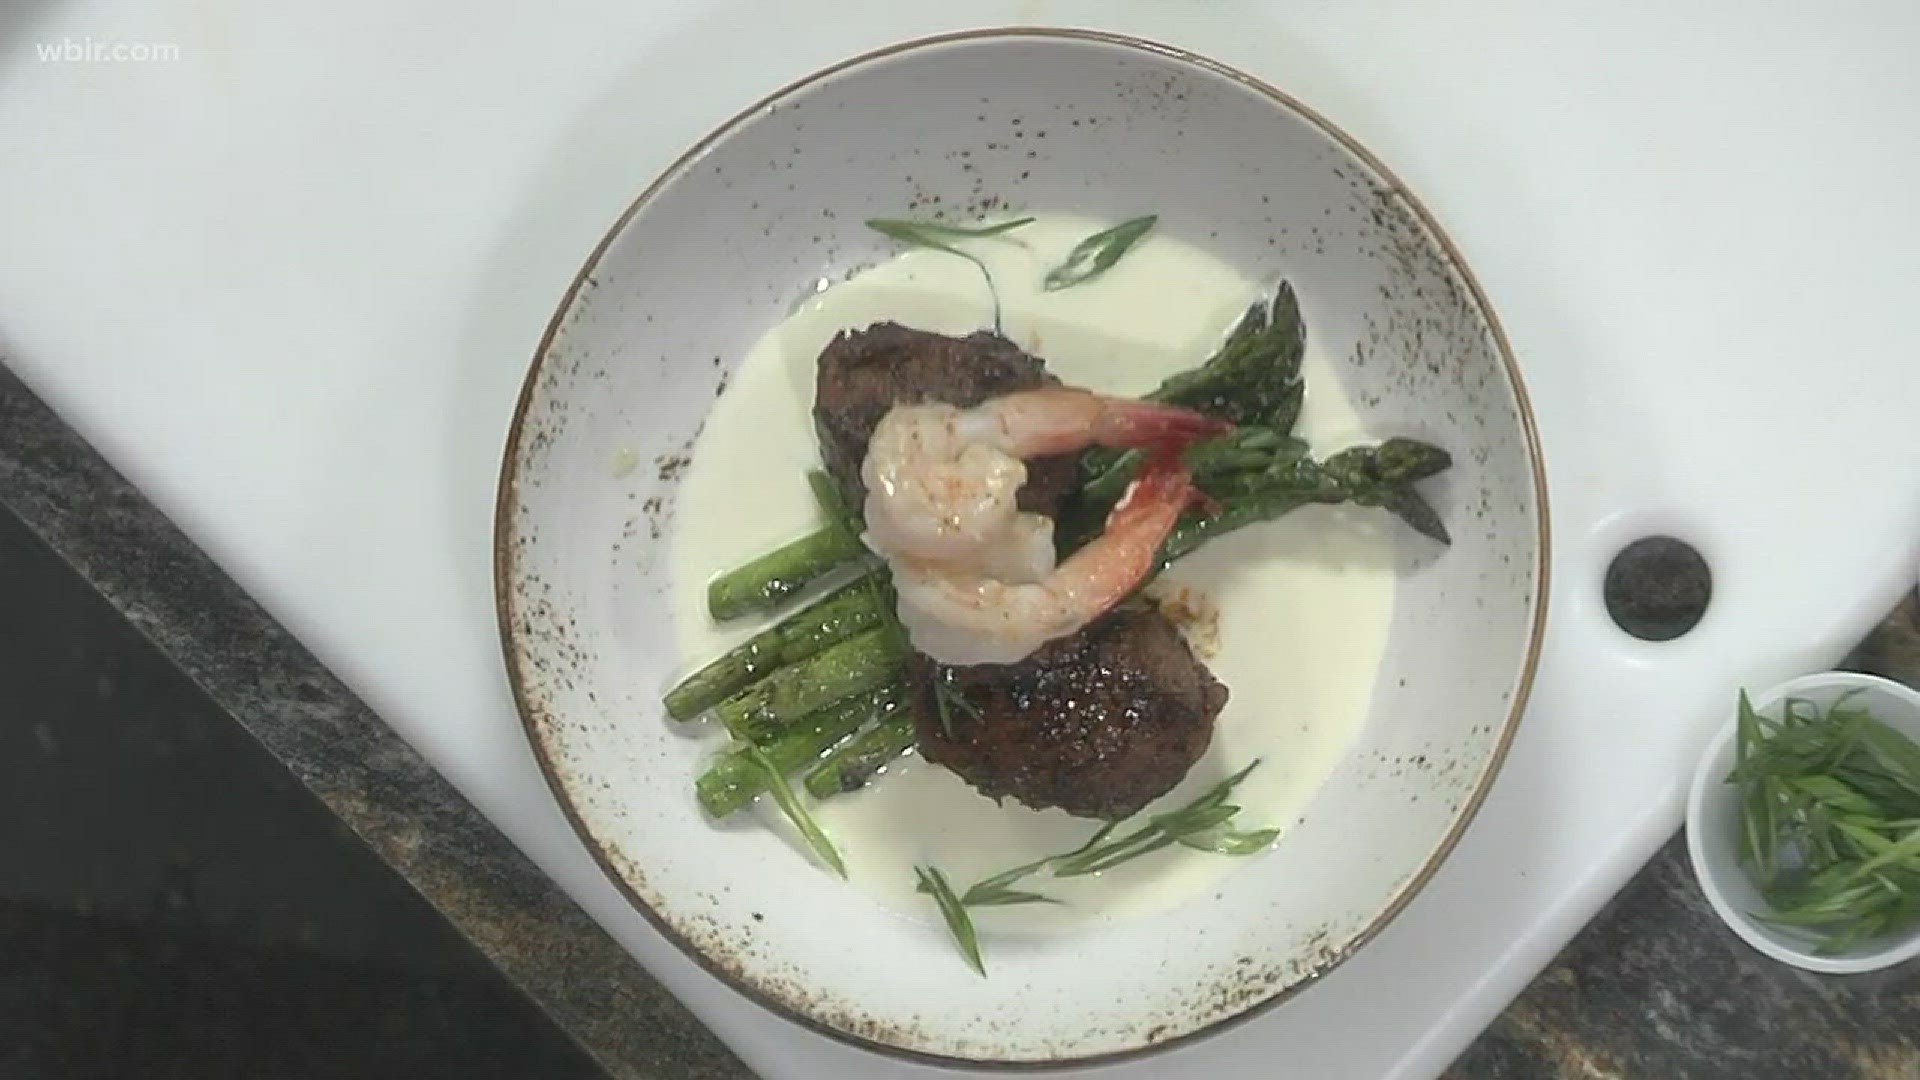 Chef TJ from Babalu shows us how to make a fancy dish for your Valentine!